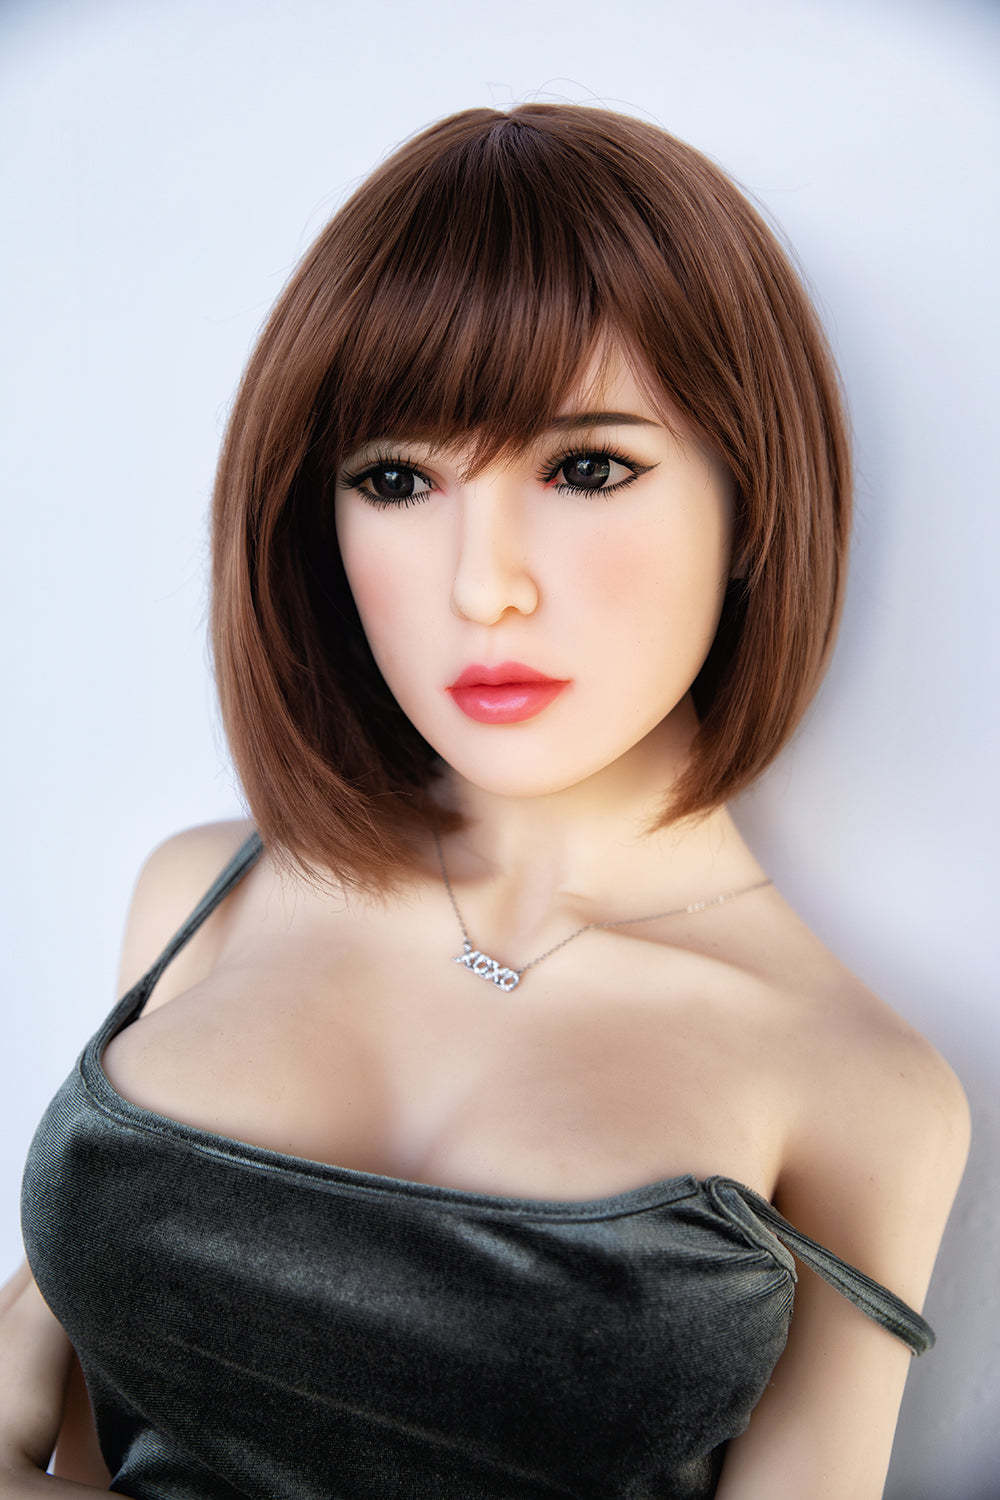 June-5 ft 5 in / 166 cm Realistic Sex Doll